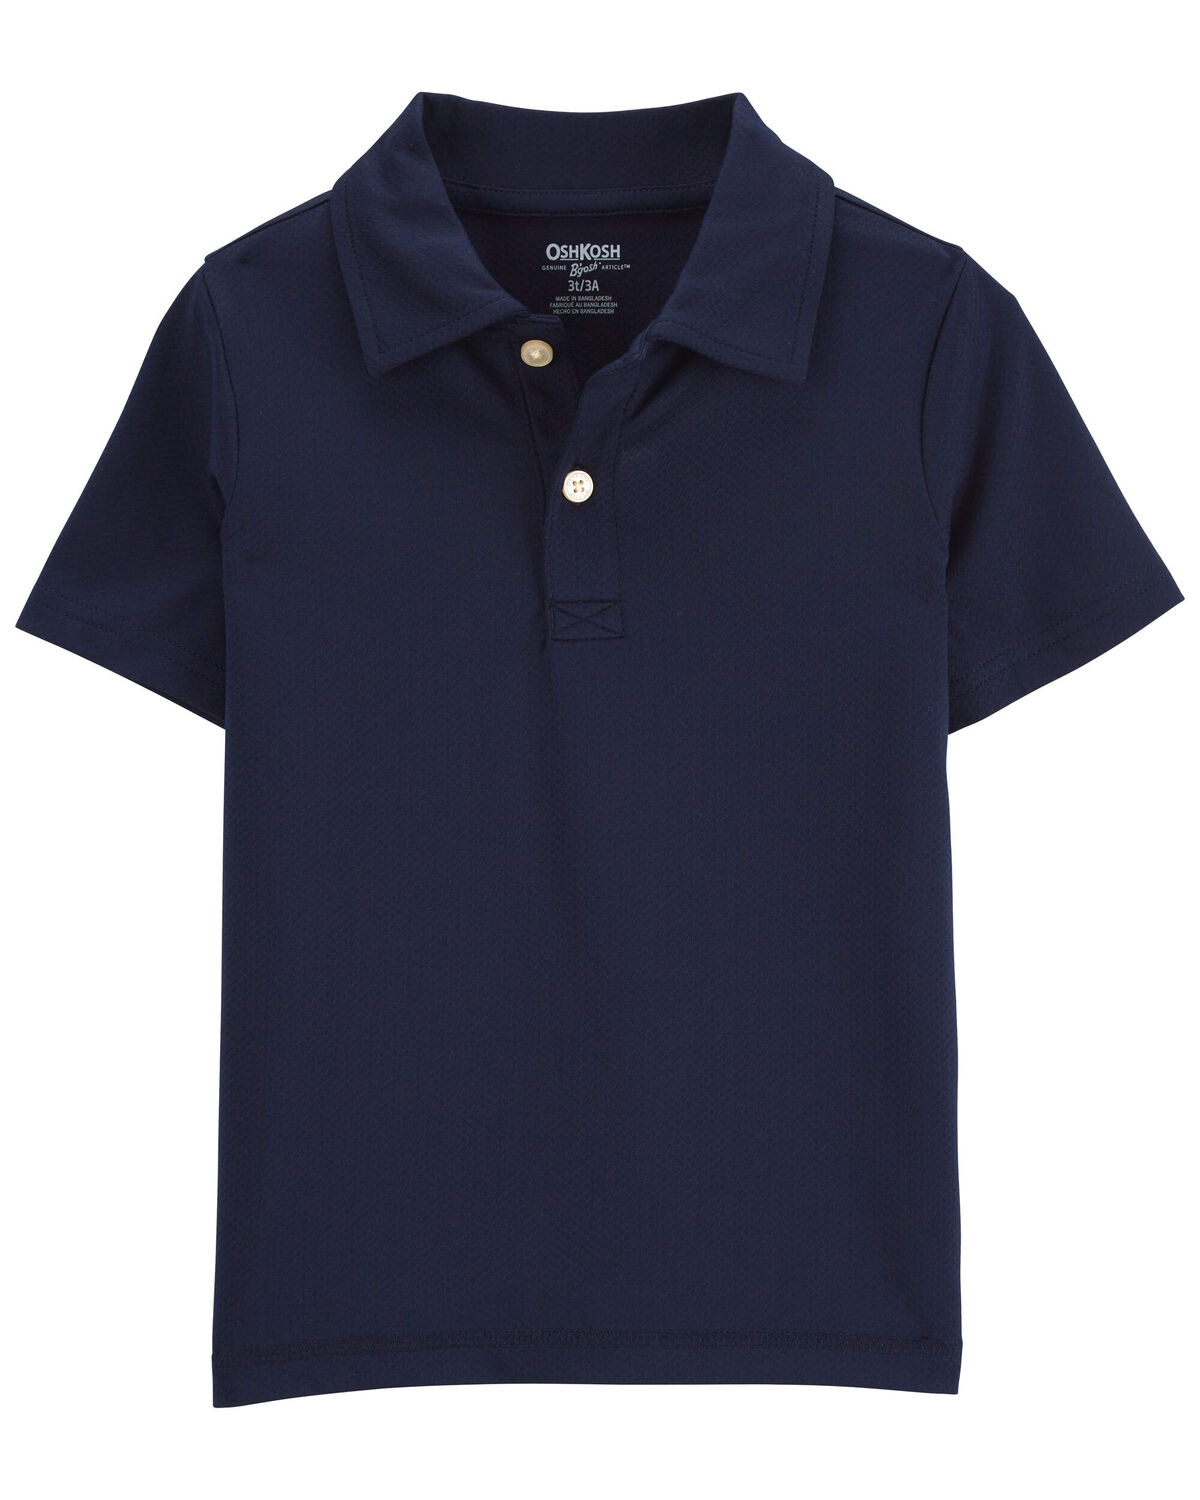 Toddler Polo Shirt in Moisture Wicking Active Mesh